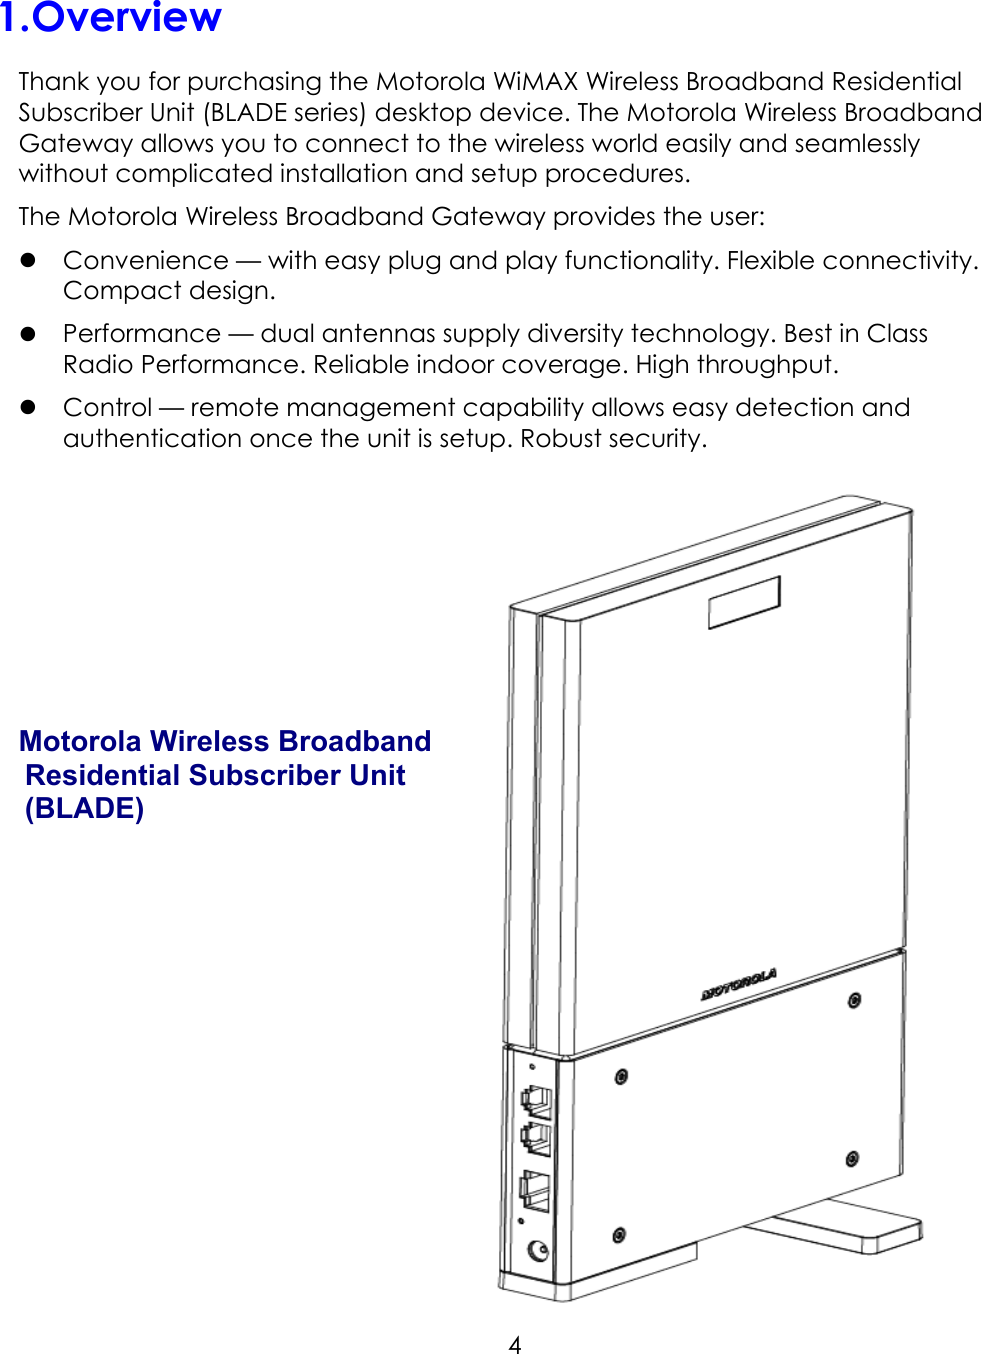     4 1. Overview Thank you for purchasing the Motorola WiMAX Wireless Broadband Residential Subscriber Unit (BLADE series) desktop device. The Motorola Wireless Broadband Gateway allows you to connect to the wireless world easily and seamlessly without complicated installation and setup procedures. The Motorola Wireless Broadband Gateway provides the user:  Convenience — with easy plug and play functionality. Flexible connectivity. Compact design.  Performance — dual antennas supply diversity technology. Best in Class Radio Performance. Reliable indoor coverage. High throughput.  Control — remote management capability allows easy detection and authentication once the unit is setup. Robust security.       Motorola Wireless Broadband Residential Subscriber Unit (BLADE)     